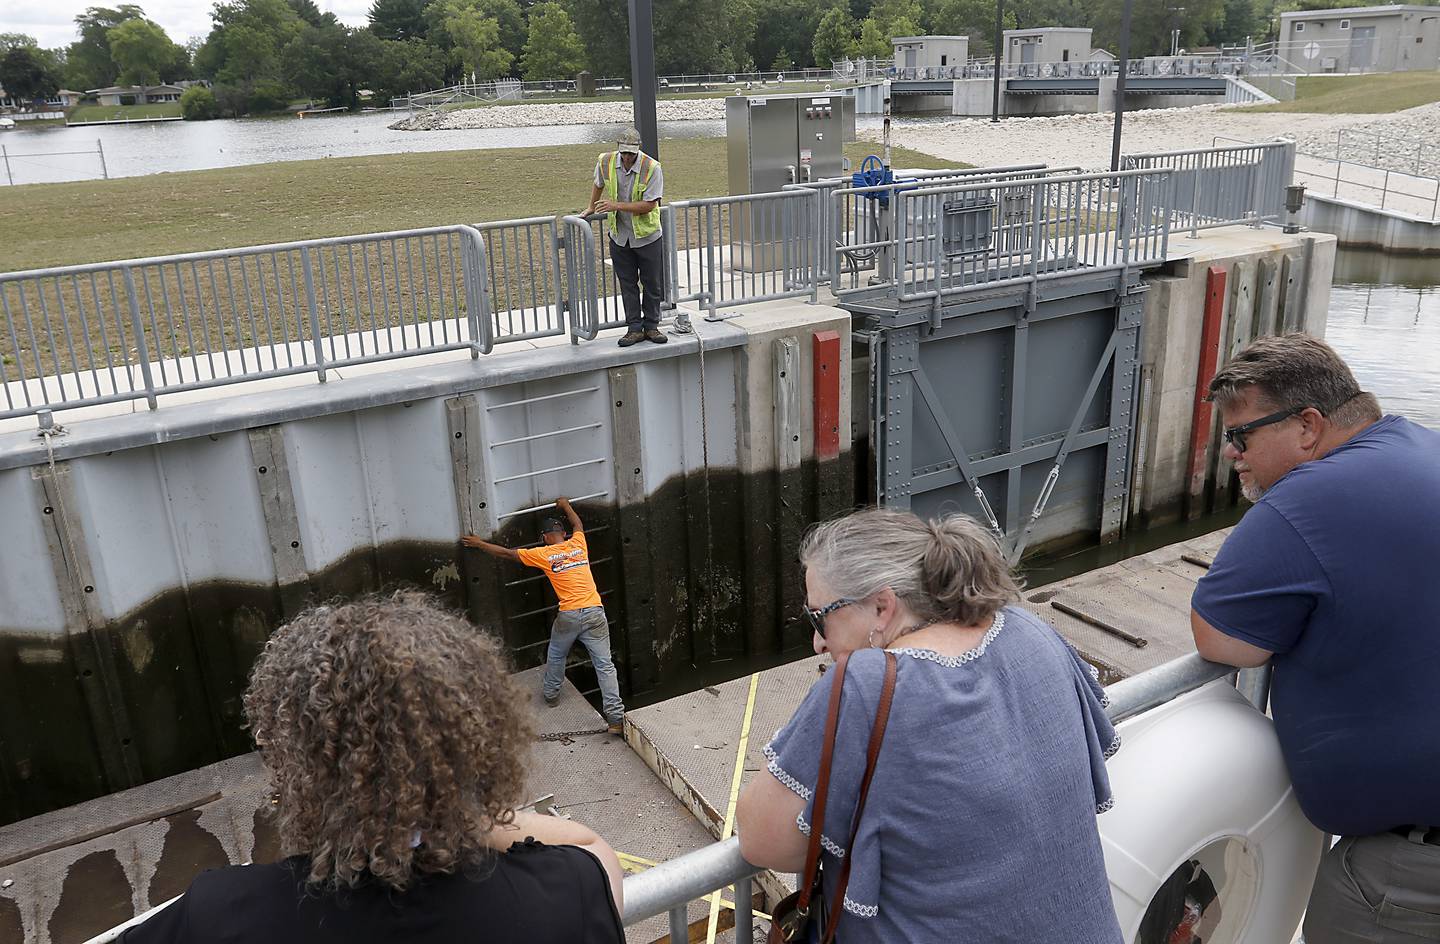 People watch as workers navigate a large barge that only has eight inches of clearance through the locks during a completion celebration of the $22 million improvement project of the Stratton Lock and Dam, 2910 State Park Road, in McHenry, on Wednesday, July 13, 2022. The dam, that is operated by Illinois Department of Natural Resources’s Office of Water Resources, to help ensure safe and efficient recreational boating on the Fox River Chain of Lakes. Close to 20,000 watercraft pass through the lock during the boating season.